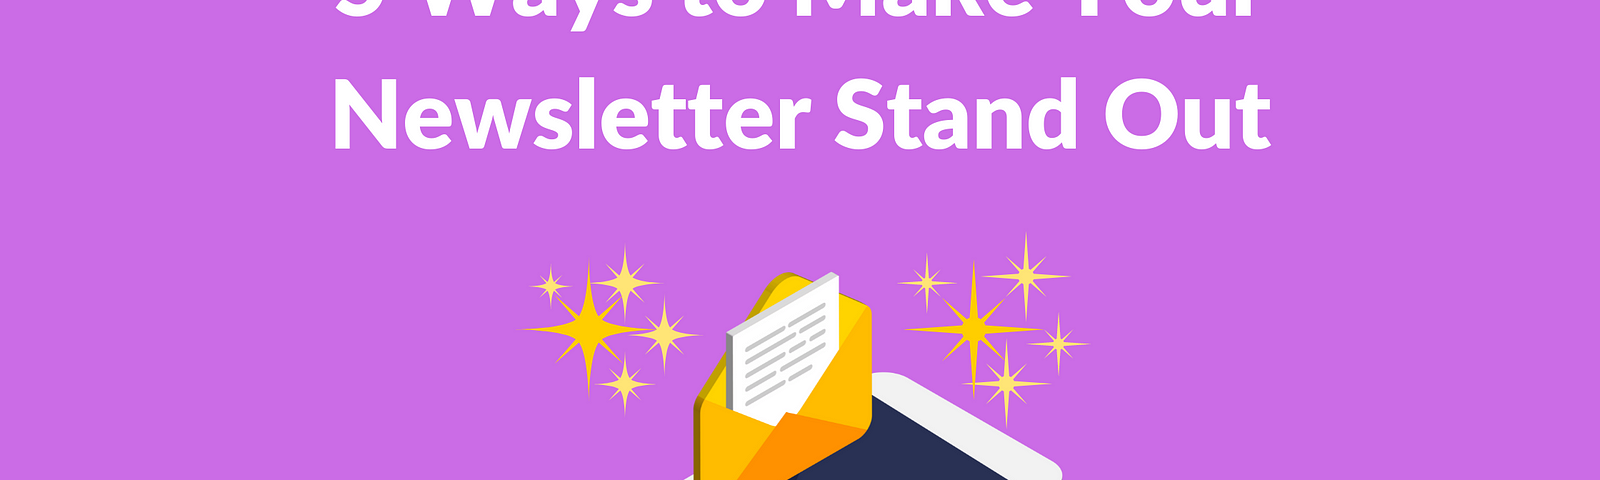 ways to make your newsletter stand out, How do I make a newsletter look good, How do you attract people to a newsletter, How do I make a newsletter more interactive, newsletter tips